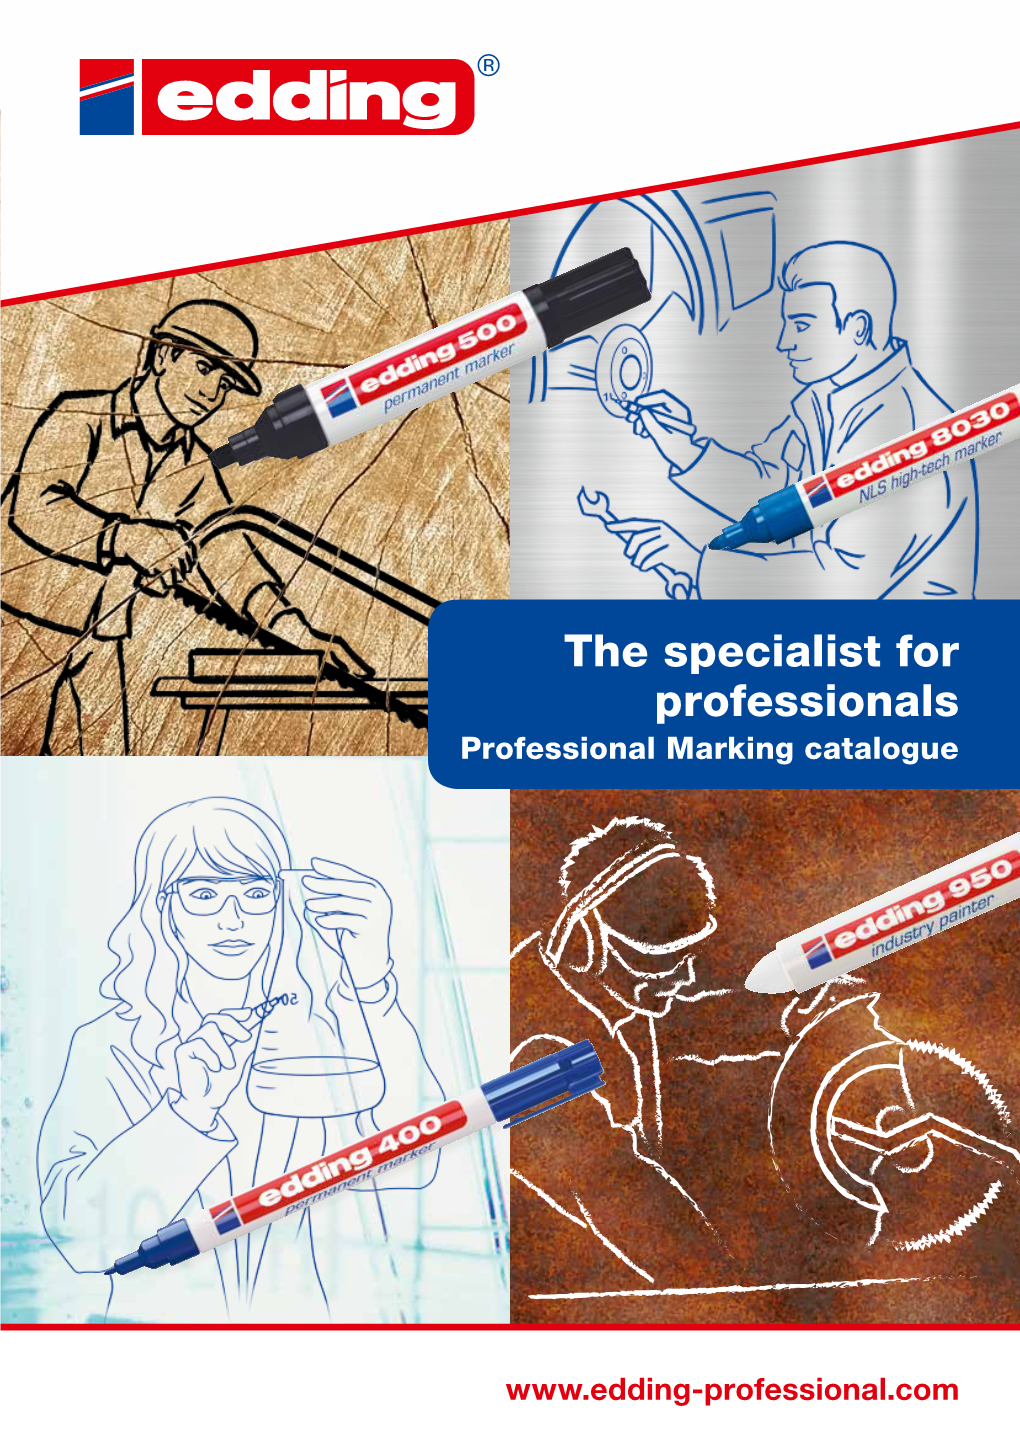 The Specialist for Professionals Professional Marking Catalogue